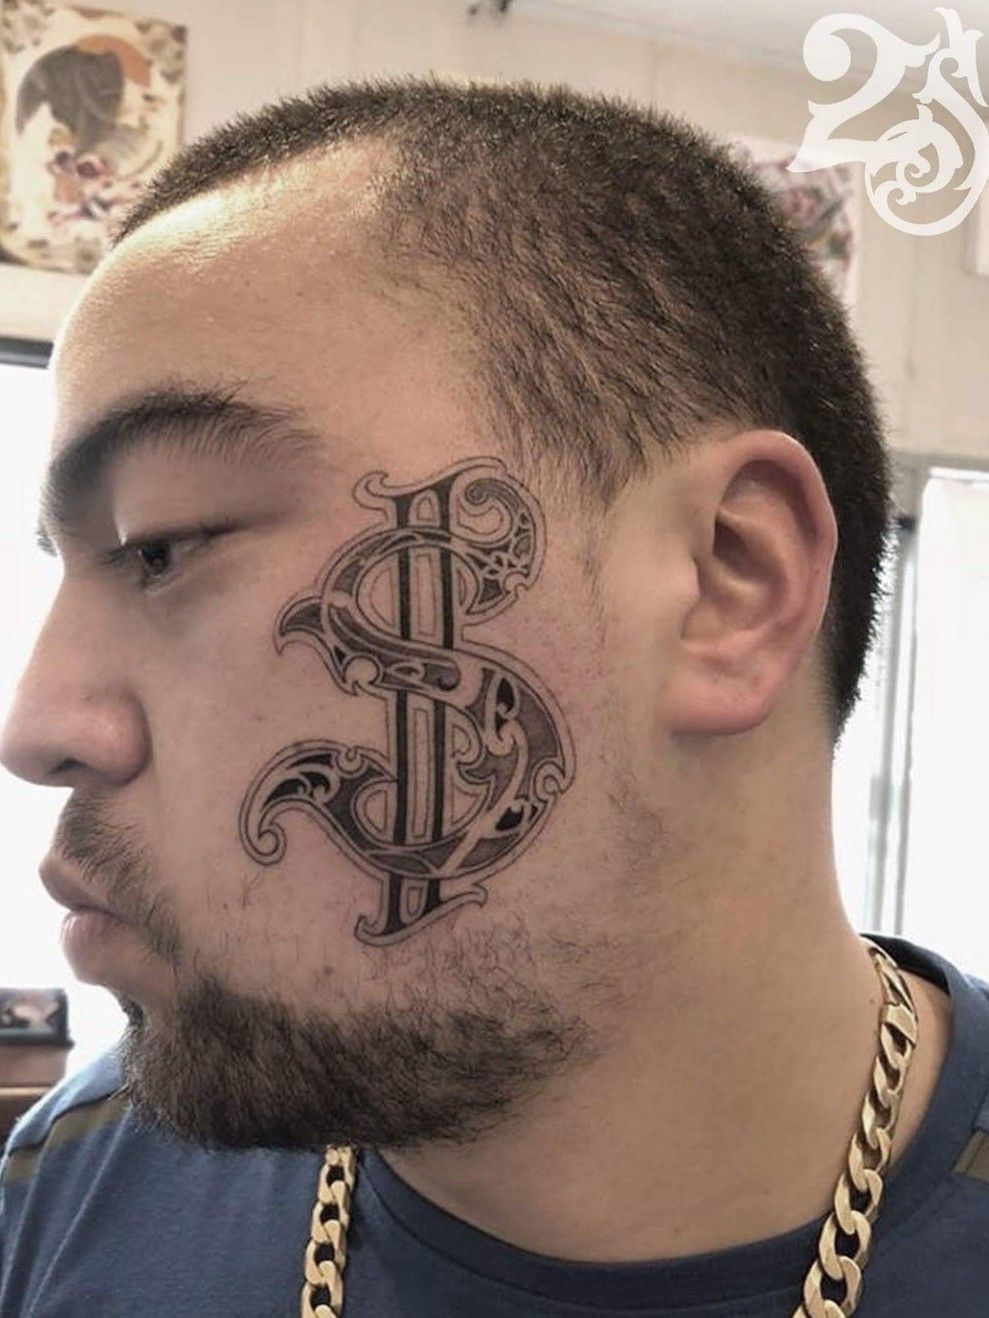 Cristian Hernandez  Money Sign anyone want a face tattoo Email me    slowdesign13 money moneysigntattoo facetattoo facetattoos  atlantatattooartist atlantaartists smalltattoo facebanger microtattoo  goldenanchortattoo goldenanchortattoos 